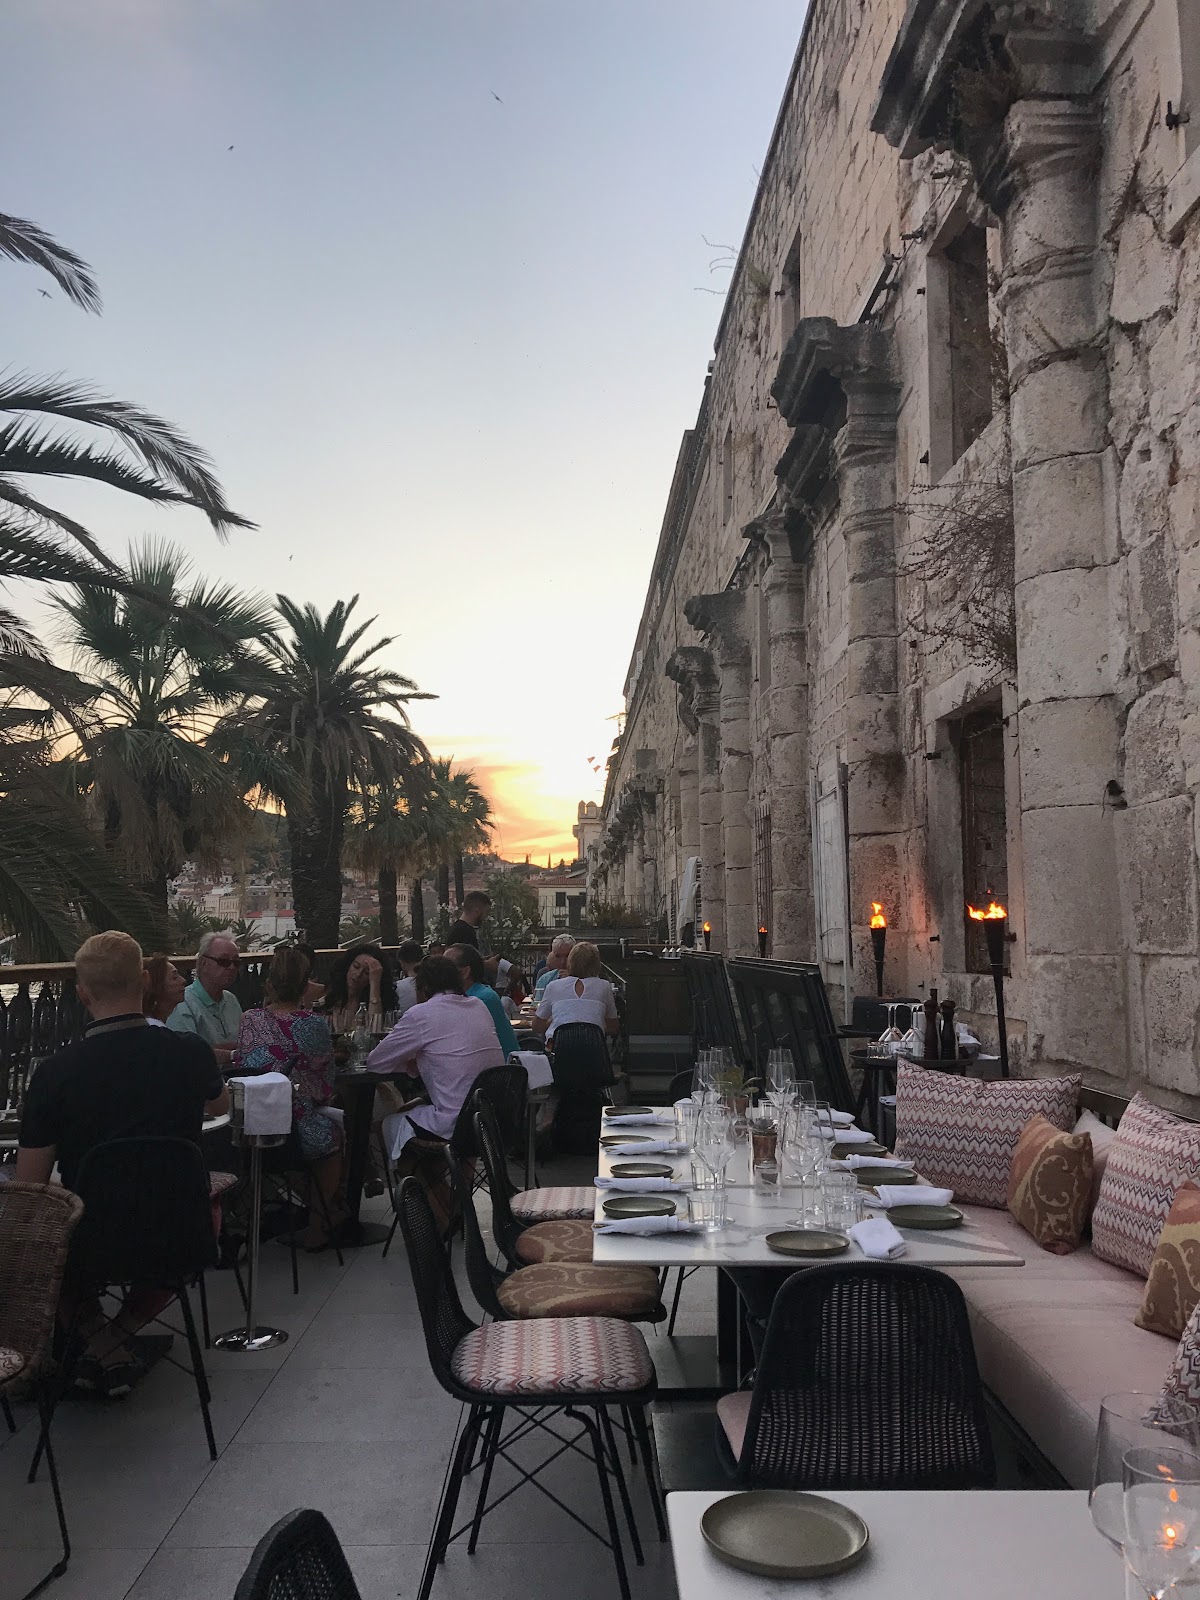 Prestigious outdoor restaurant by the walls of Diocletian's Palace. Tourists, outdoor terrace next to palm trees and one large empty table. beautiful sunset in split croatia